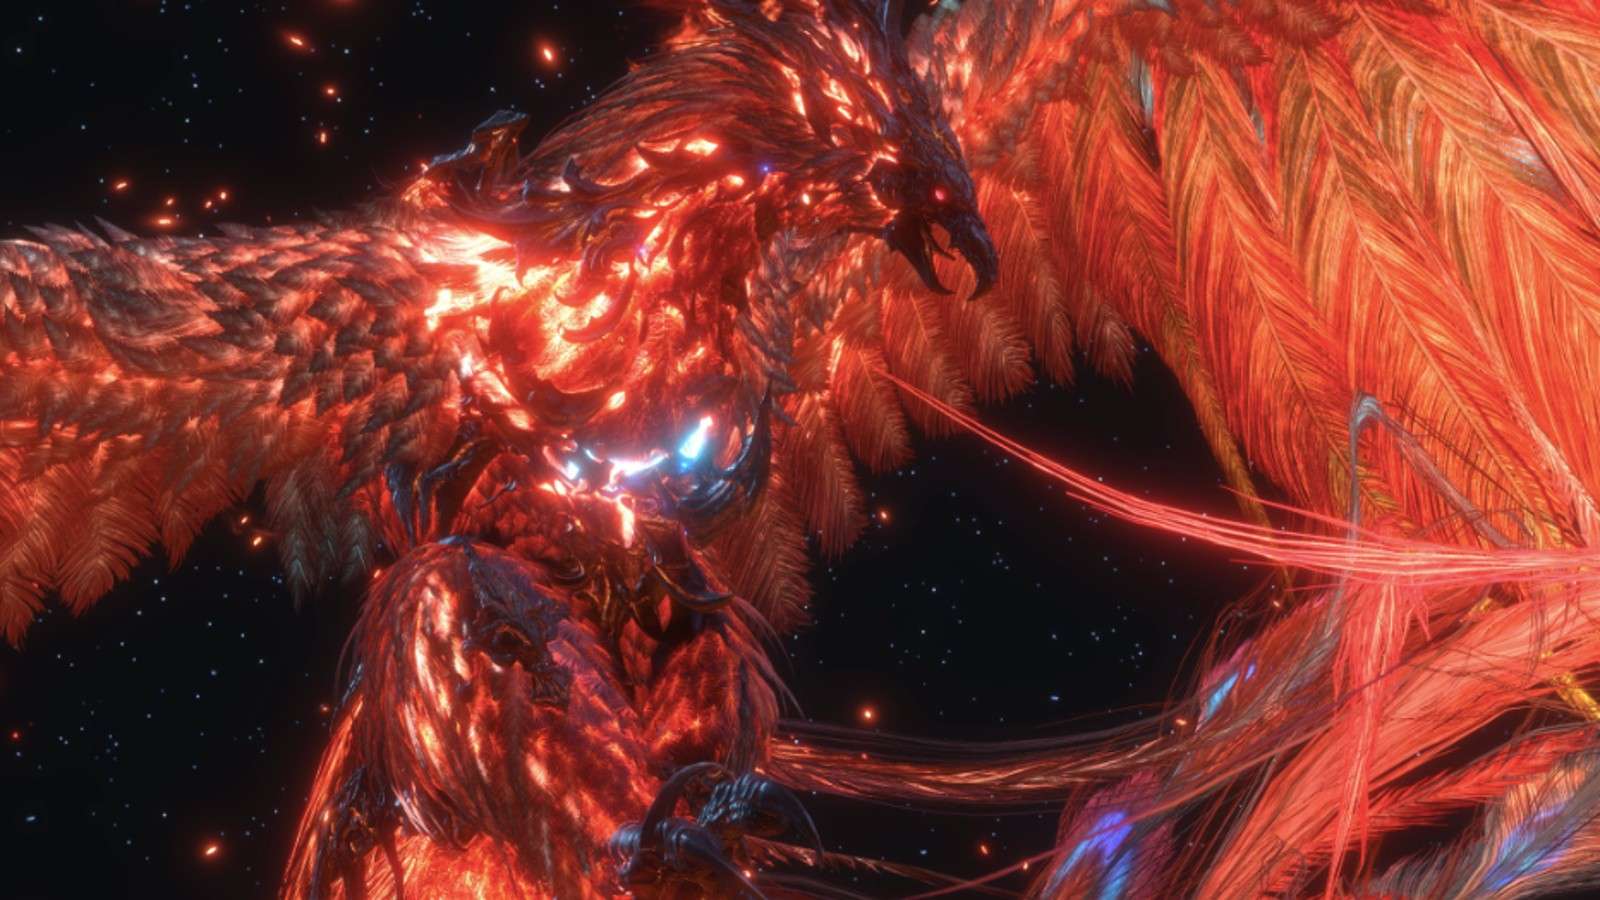 An image of the Phoenix, one of the Dominants in Final Fantasy XVI.